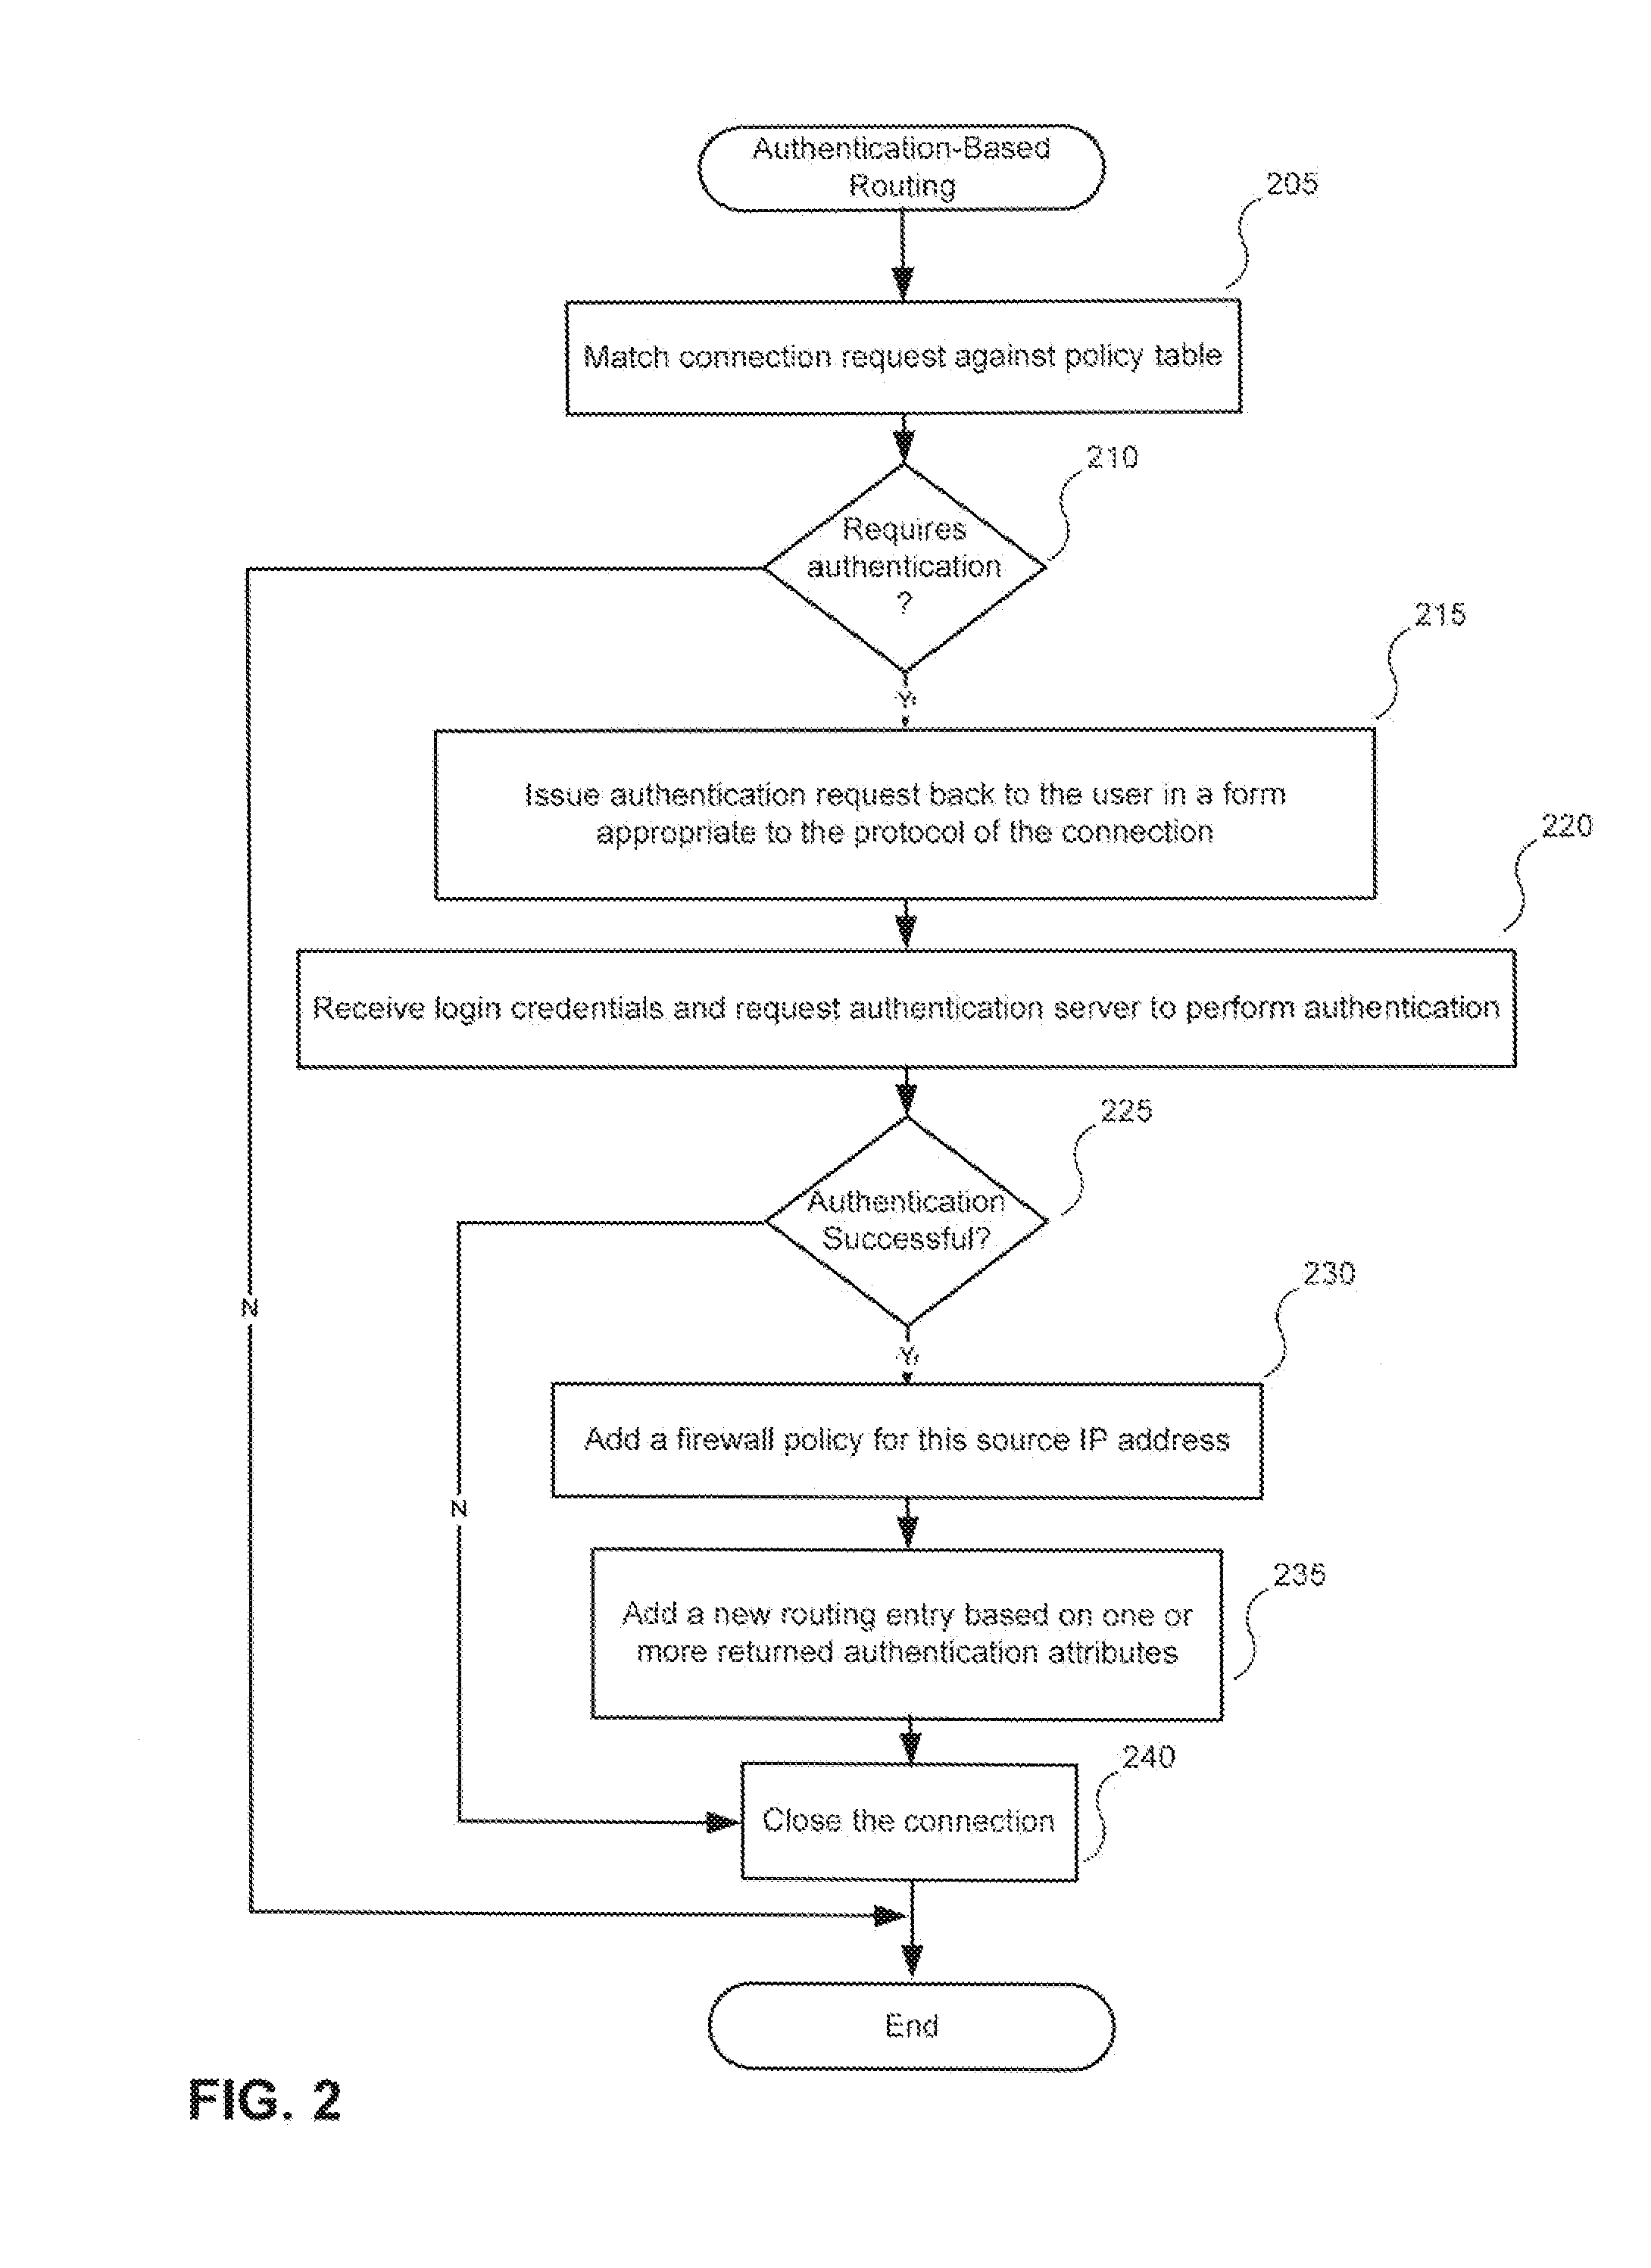 Use of authentication information to make routing decisions